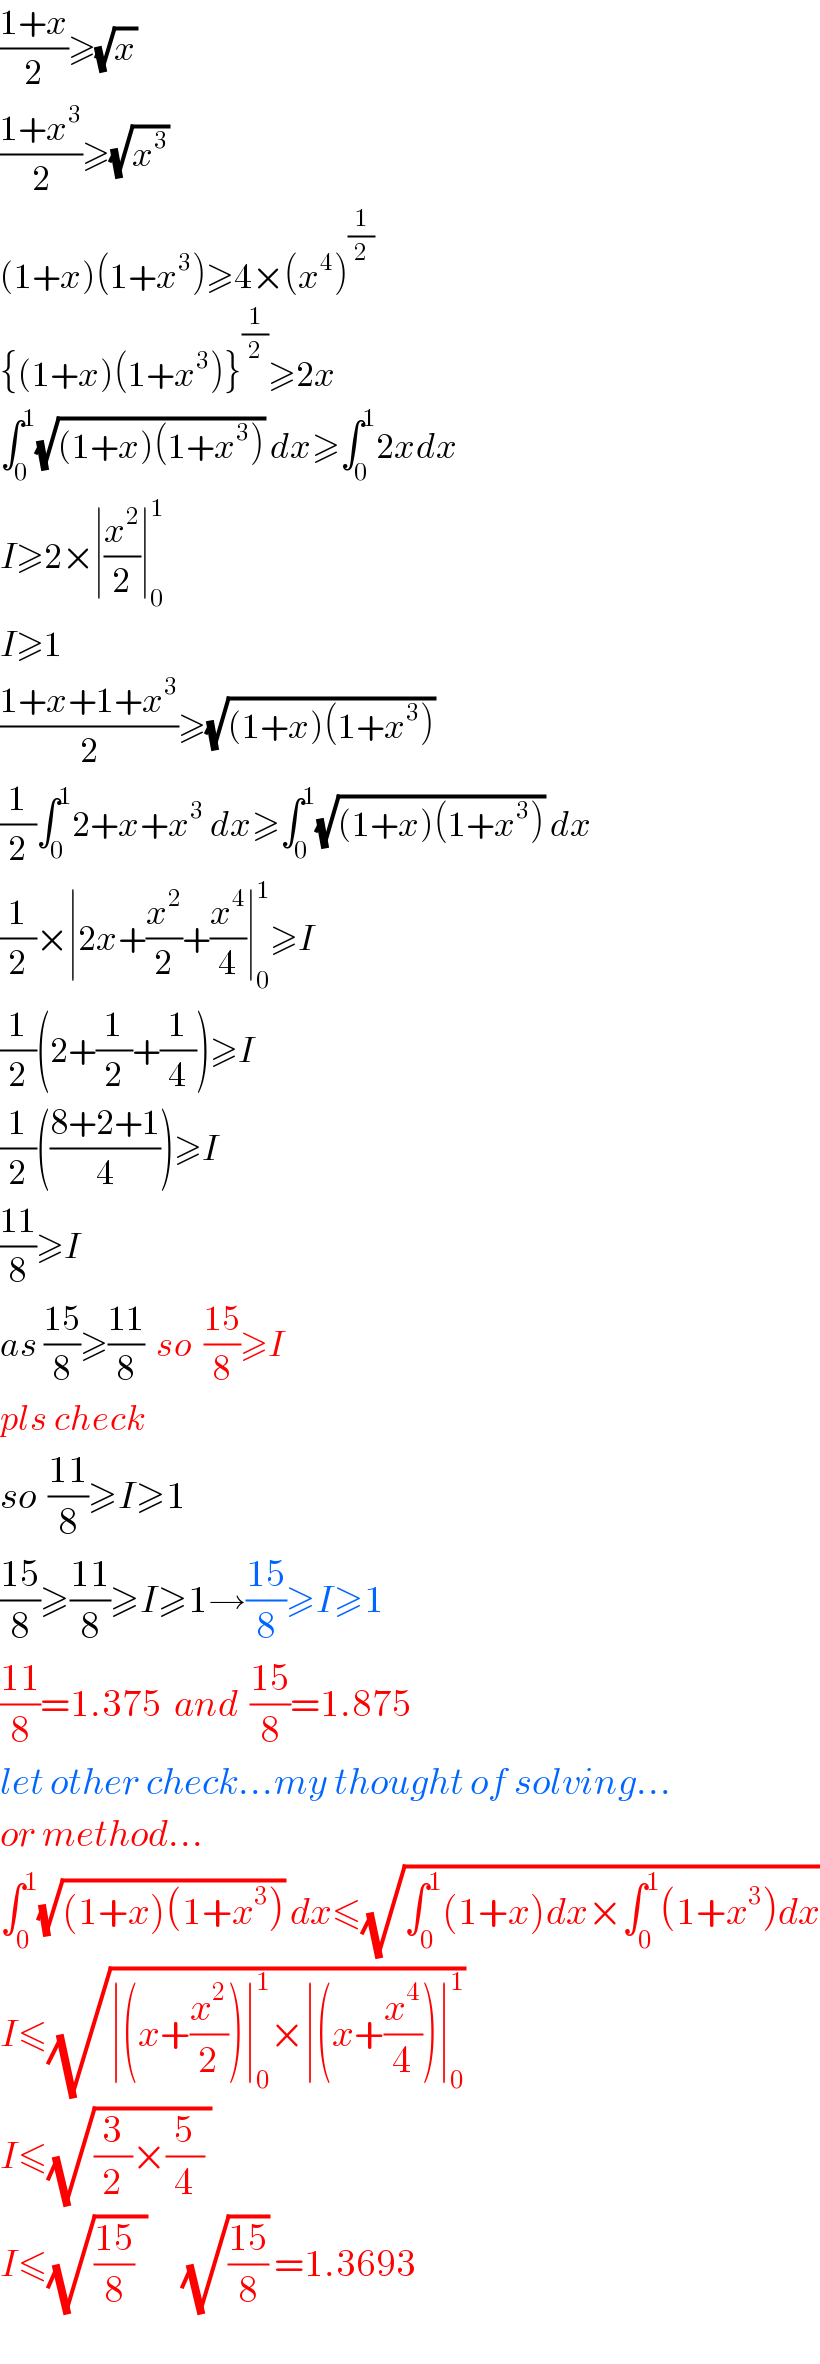 ((1+x)/2)≥(√x)   ((1+x^3 )/2)≥(√x^3 )   (1+x)(1+x^3 )≥4×(x^4 )^(1/2)   {(1+x)(1+x^3 )}^(1/2) ≥2x  ∫_0 ^1 (√((1+x)(1+x^3 ))) dx≥∫_0 ^1 2xdx  I≥2×∣(x^2 /2)∣_0 ^1   I≥1  ((1+x+1+x^3 )/2)≥(√((1+x)(1+x^3 )))   (1/2)∫_0 ^1 2+x+x^3  dx≥∫_0 ^1 (√((1+x)(1+x^3 ))) dx  (1/2)×∣2x+(x^2 /2)+(x^4 /4)∣_0 ^1 ≥I  (1/2)(2+(1/2)+(1/4))≥I  (1/2)(((8+2+1)/4))≥I  ((11)/8)≥I  as ((15)/8)≥((11)/8)  so  ((15)/8)≥I  pls check   so  ((11)/8)≥I≥1  ((15)/8)≥((11)/8)≥I≥1→((15)/8)≥I≥1  ((11)/8)=1.375  and  ((15)/8)=1.875  let other check...my thought of solving...  or method...  ∫_0 ^1 (√((1+x)(1+x^3 ))) dx≤(√(∫_0 ^1 (1+x)dx×∫_0 ^1 (1+x^3 )dx))  I≤(√(∣(x+(x^2 /2))∣_0 ^1 ×∣(x+(x^4 /4))∣_0 ^1 ))   I≤(√((3/2)×(5/4) ))  I≤(√(((15)/8)  ))      (√((15)/8)) =1.3693  